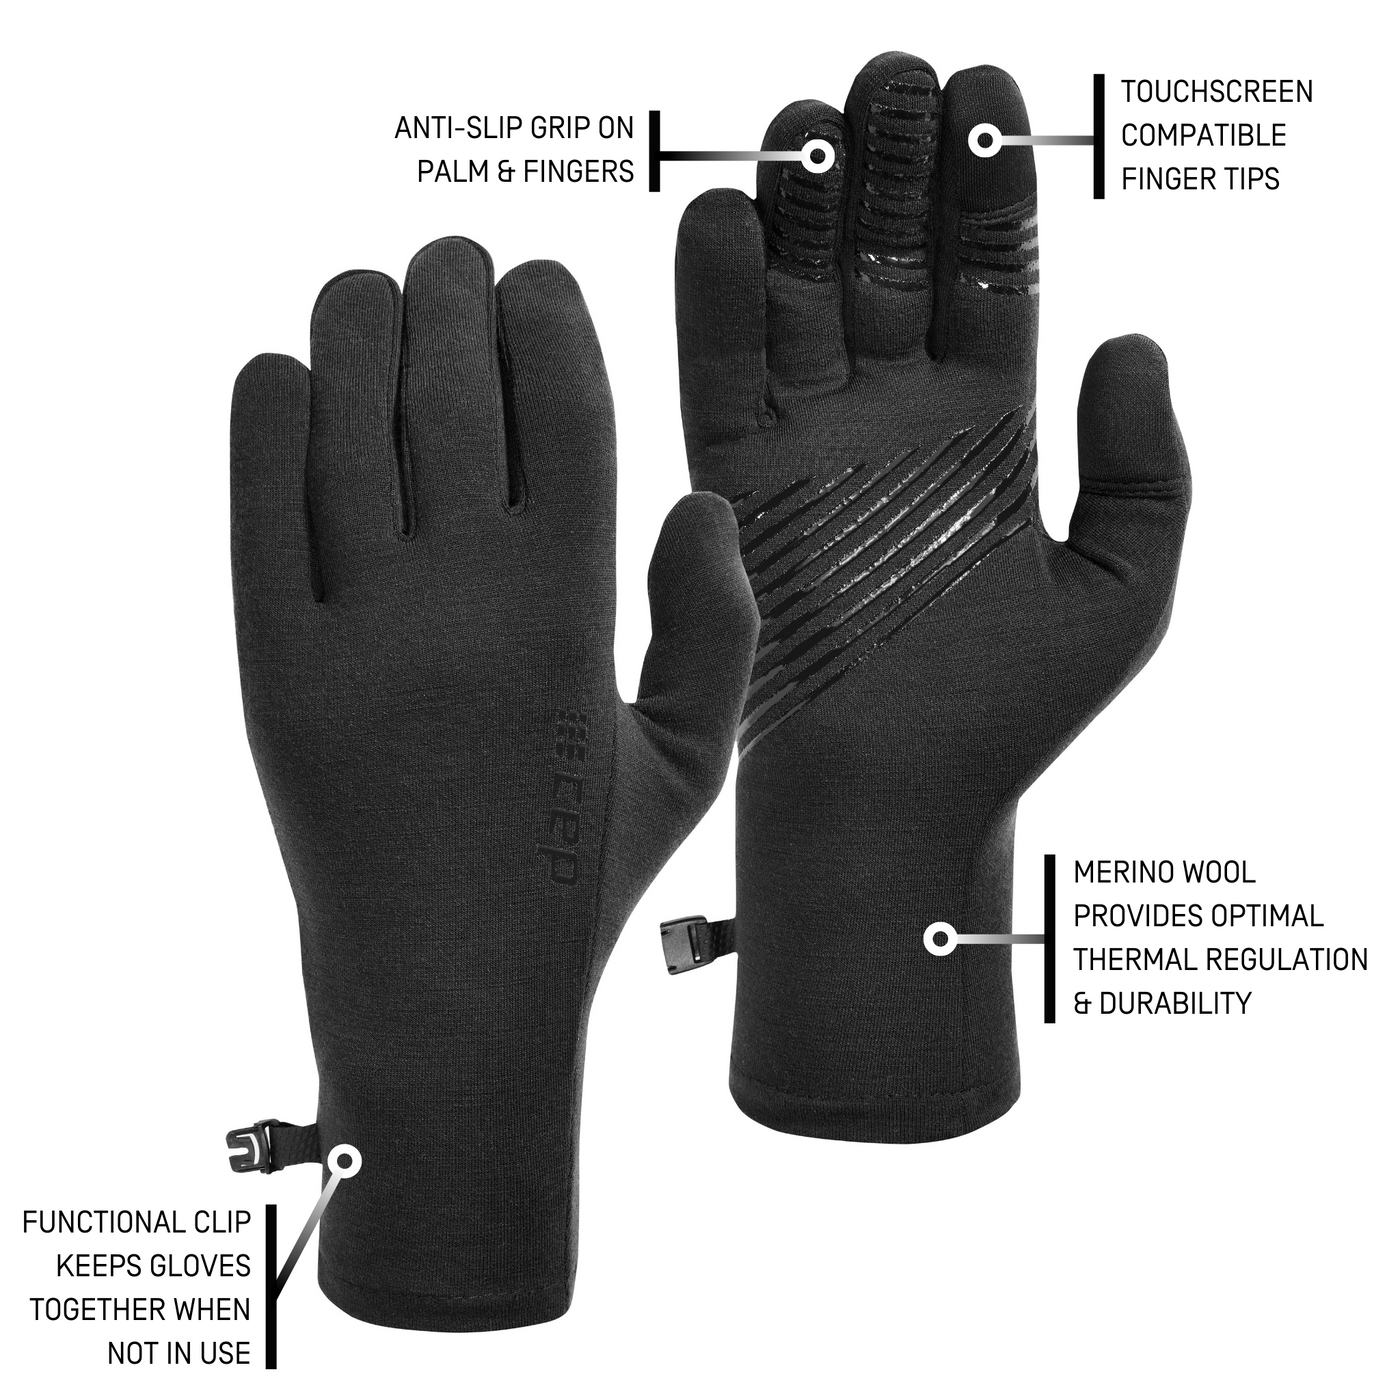 Waterproof Finger Touch Screen Non-Slip Cold Resistant Gloves 